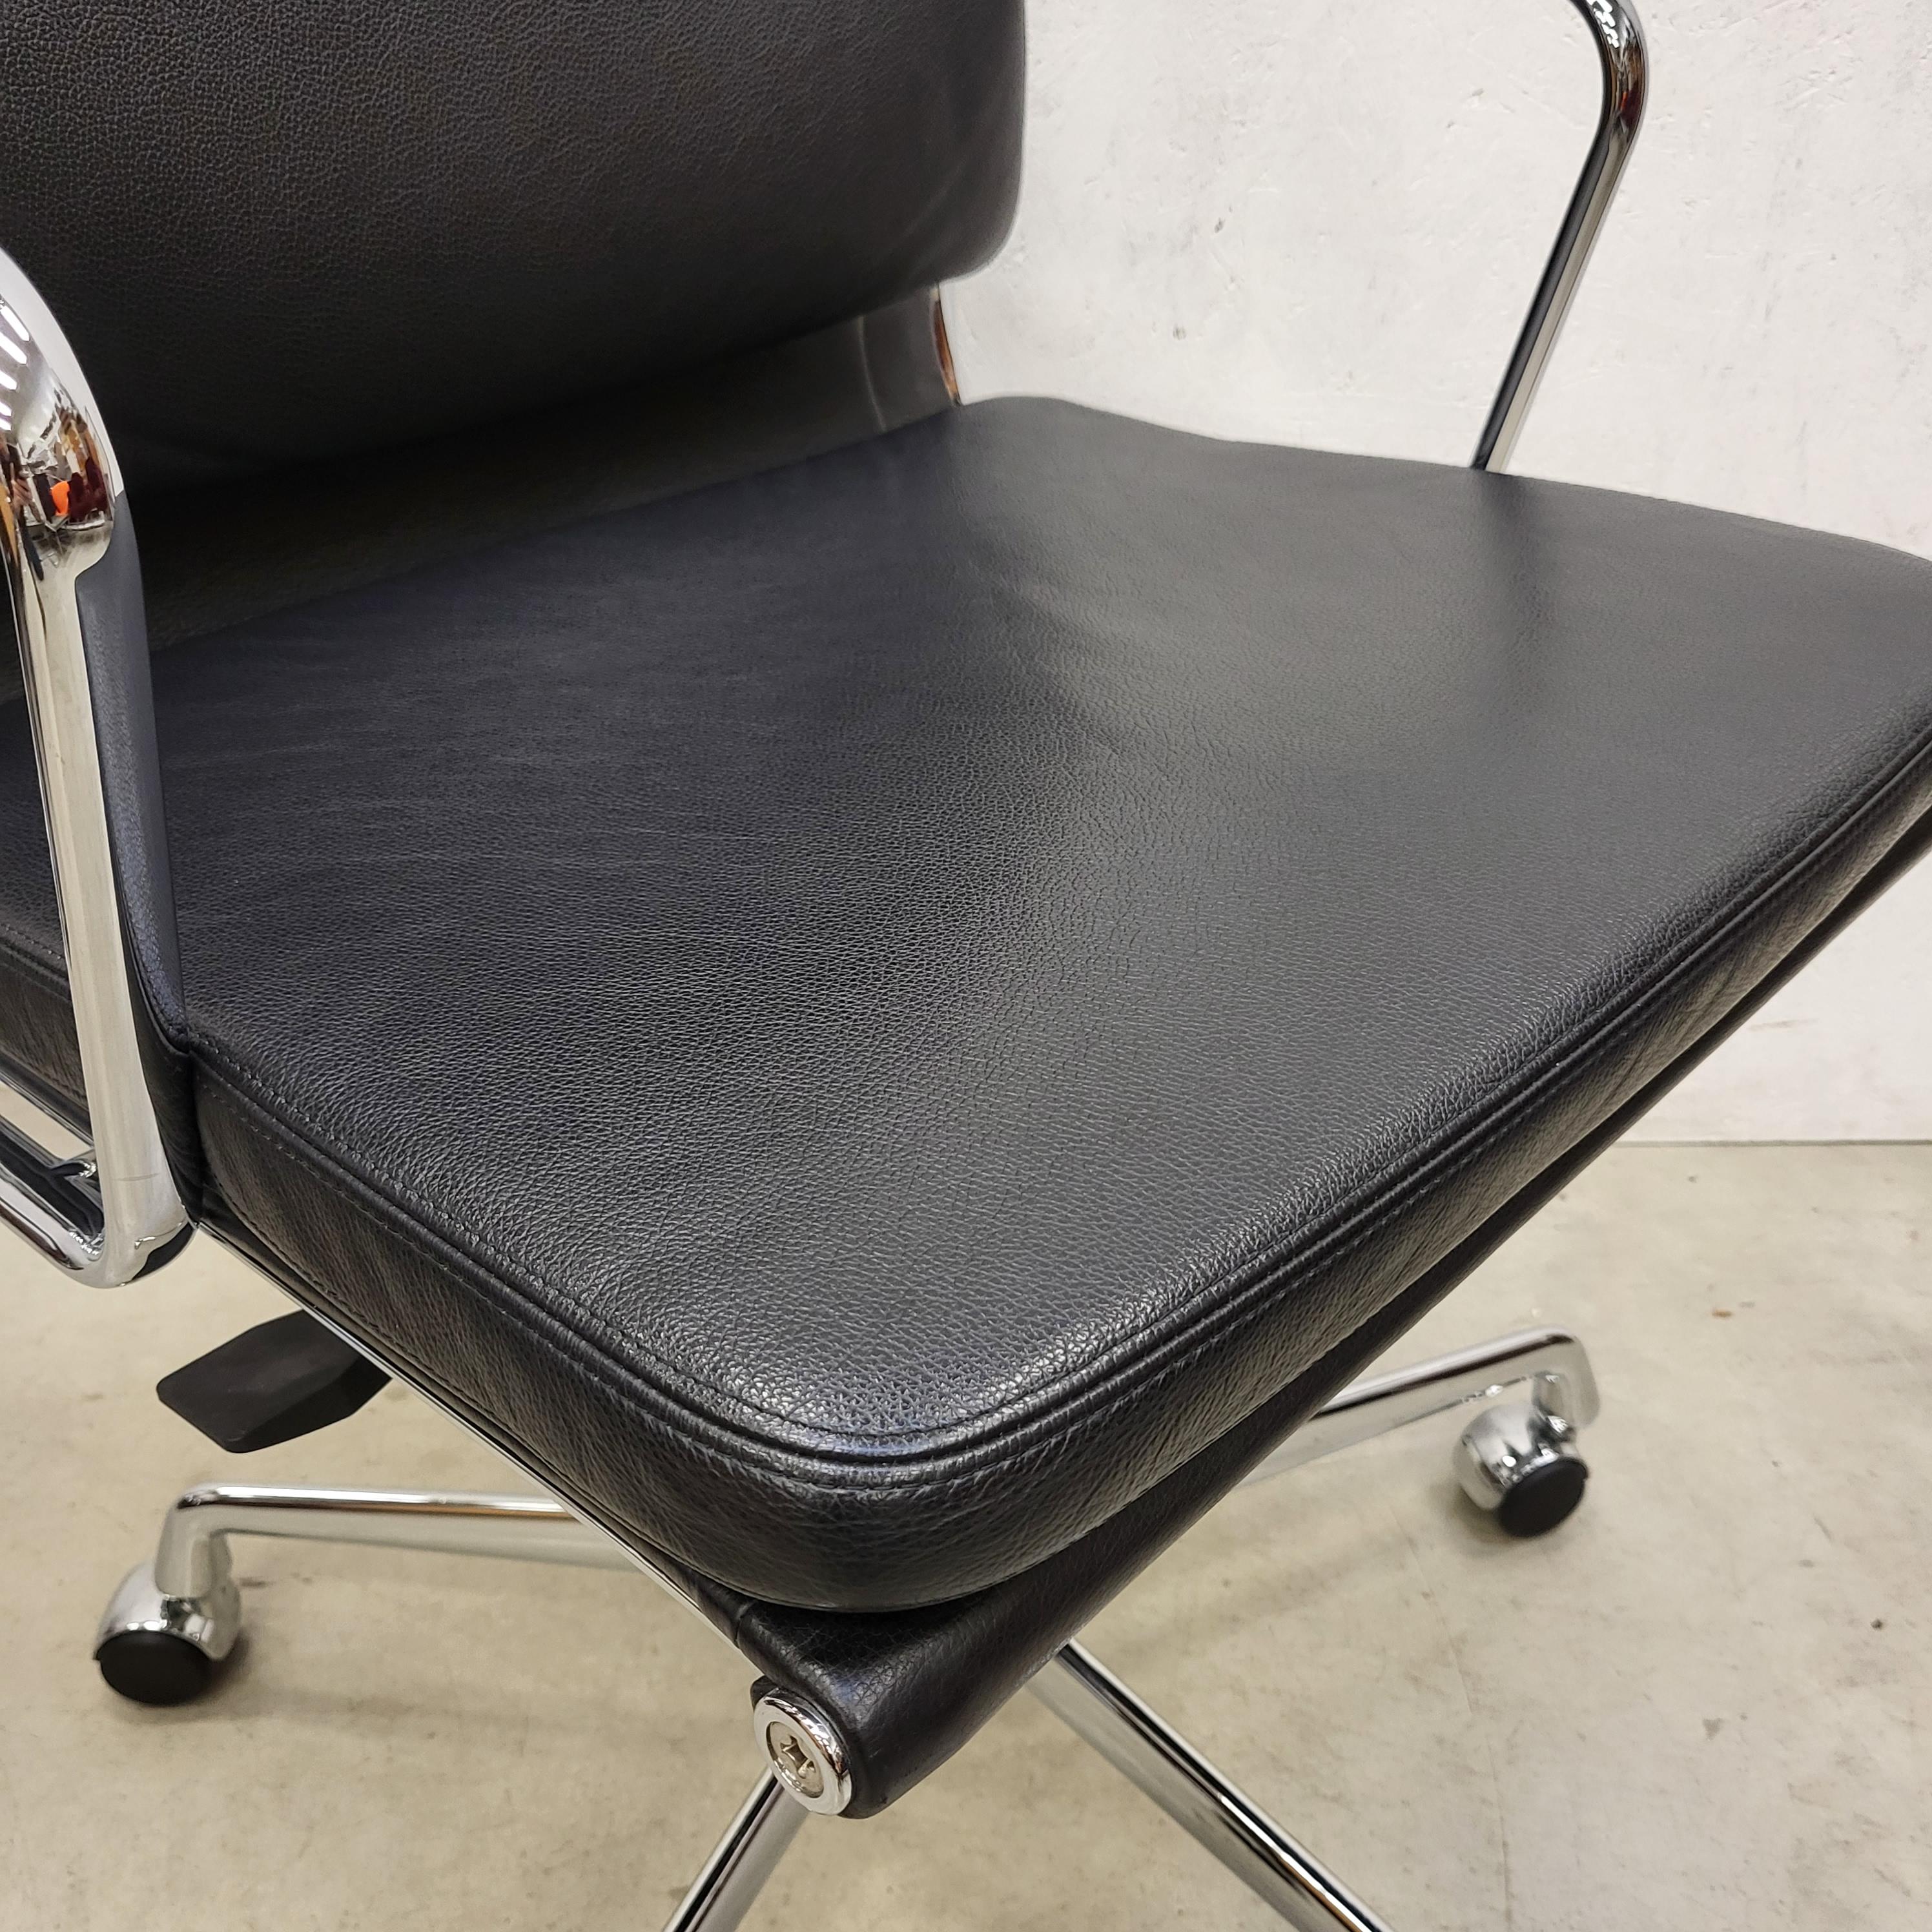 Aluminum Black Vitra EA217 Soft Pad Office Chair by Charles Eames, 2014 Model